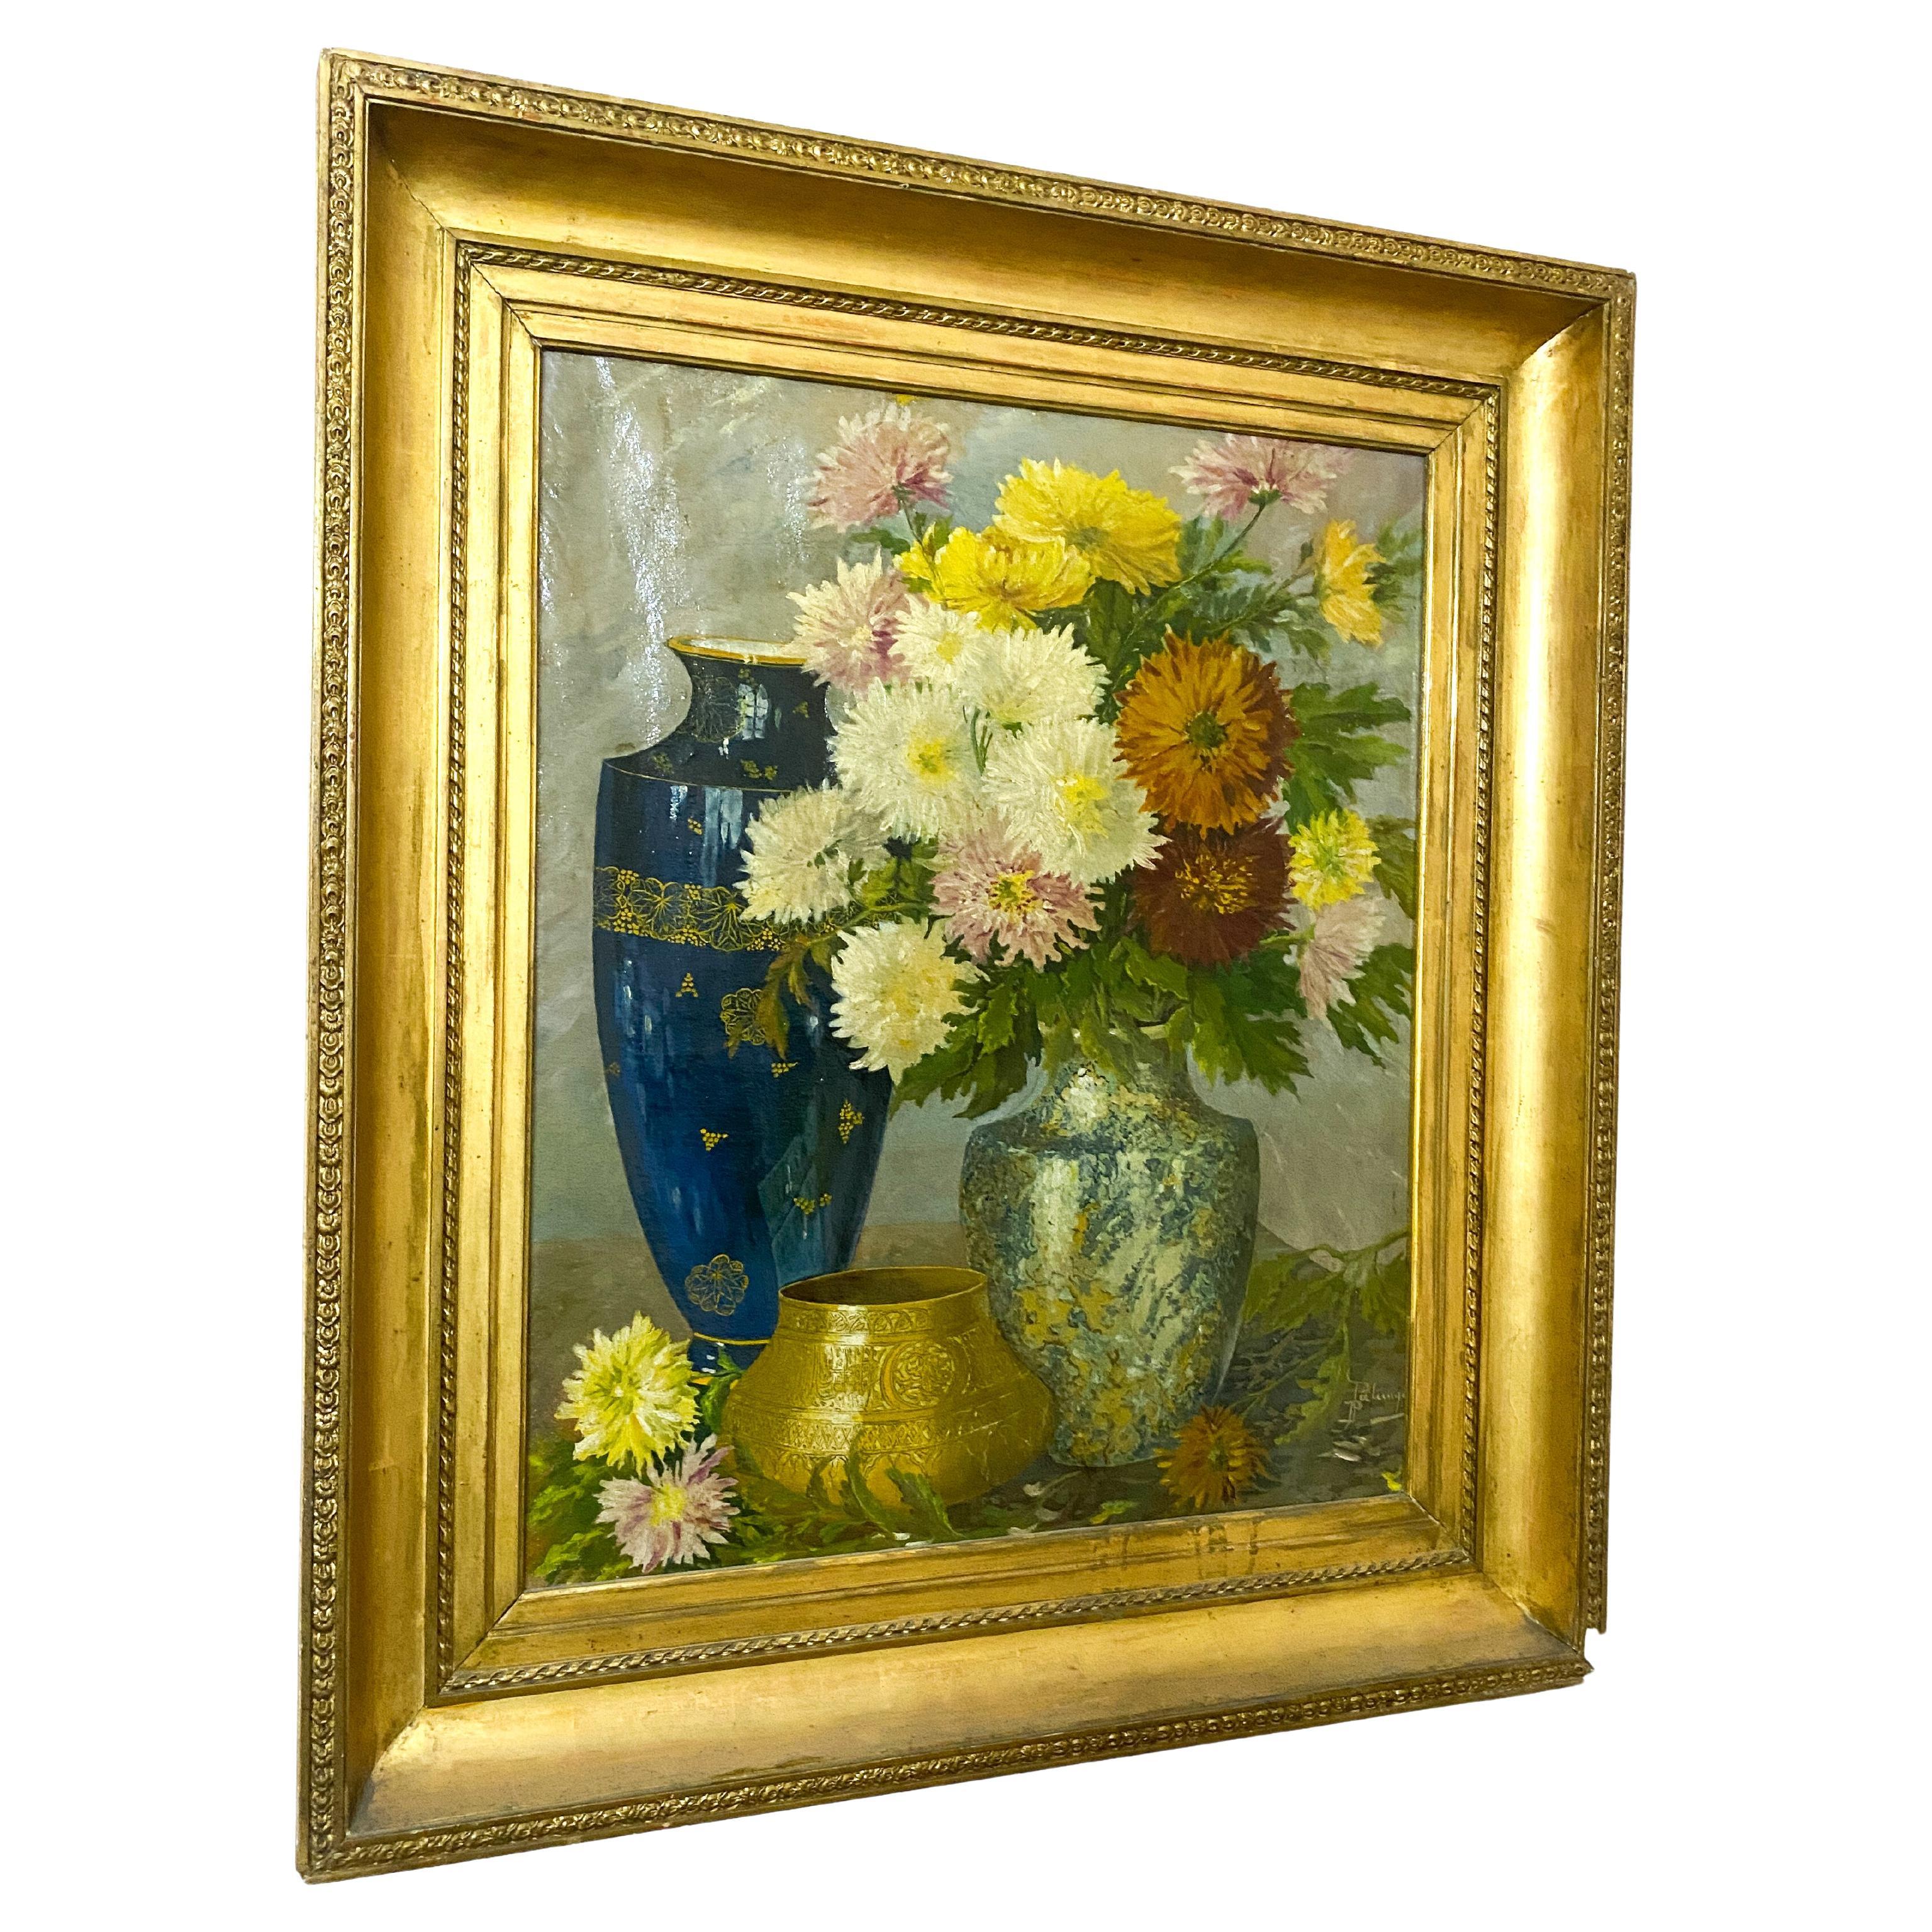 Oil painting "Still Life" signed france 1950s